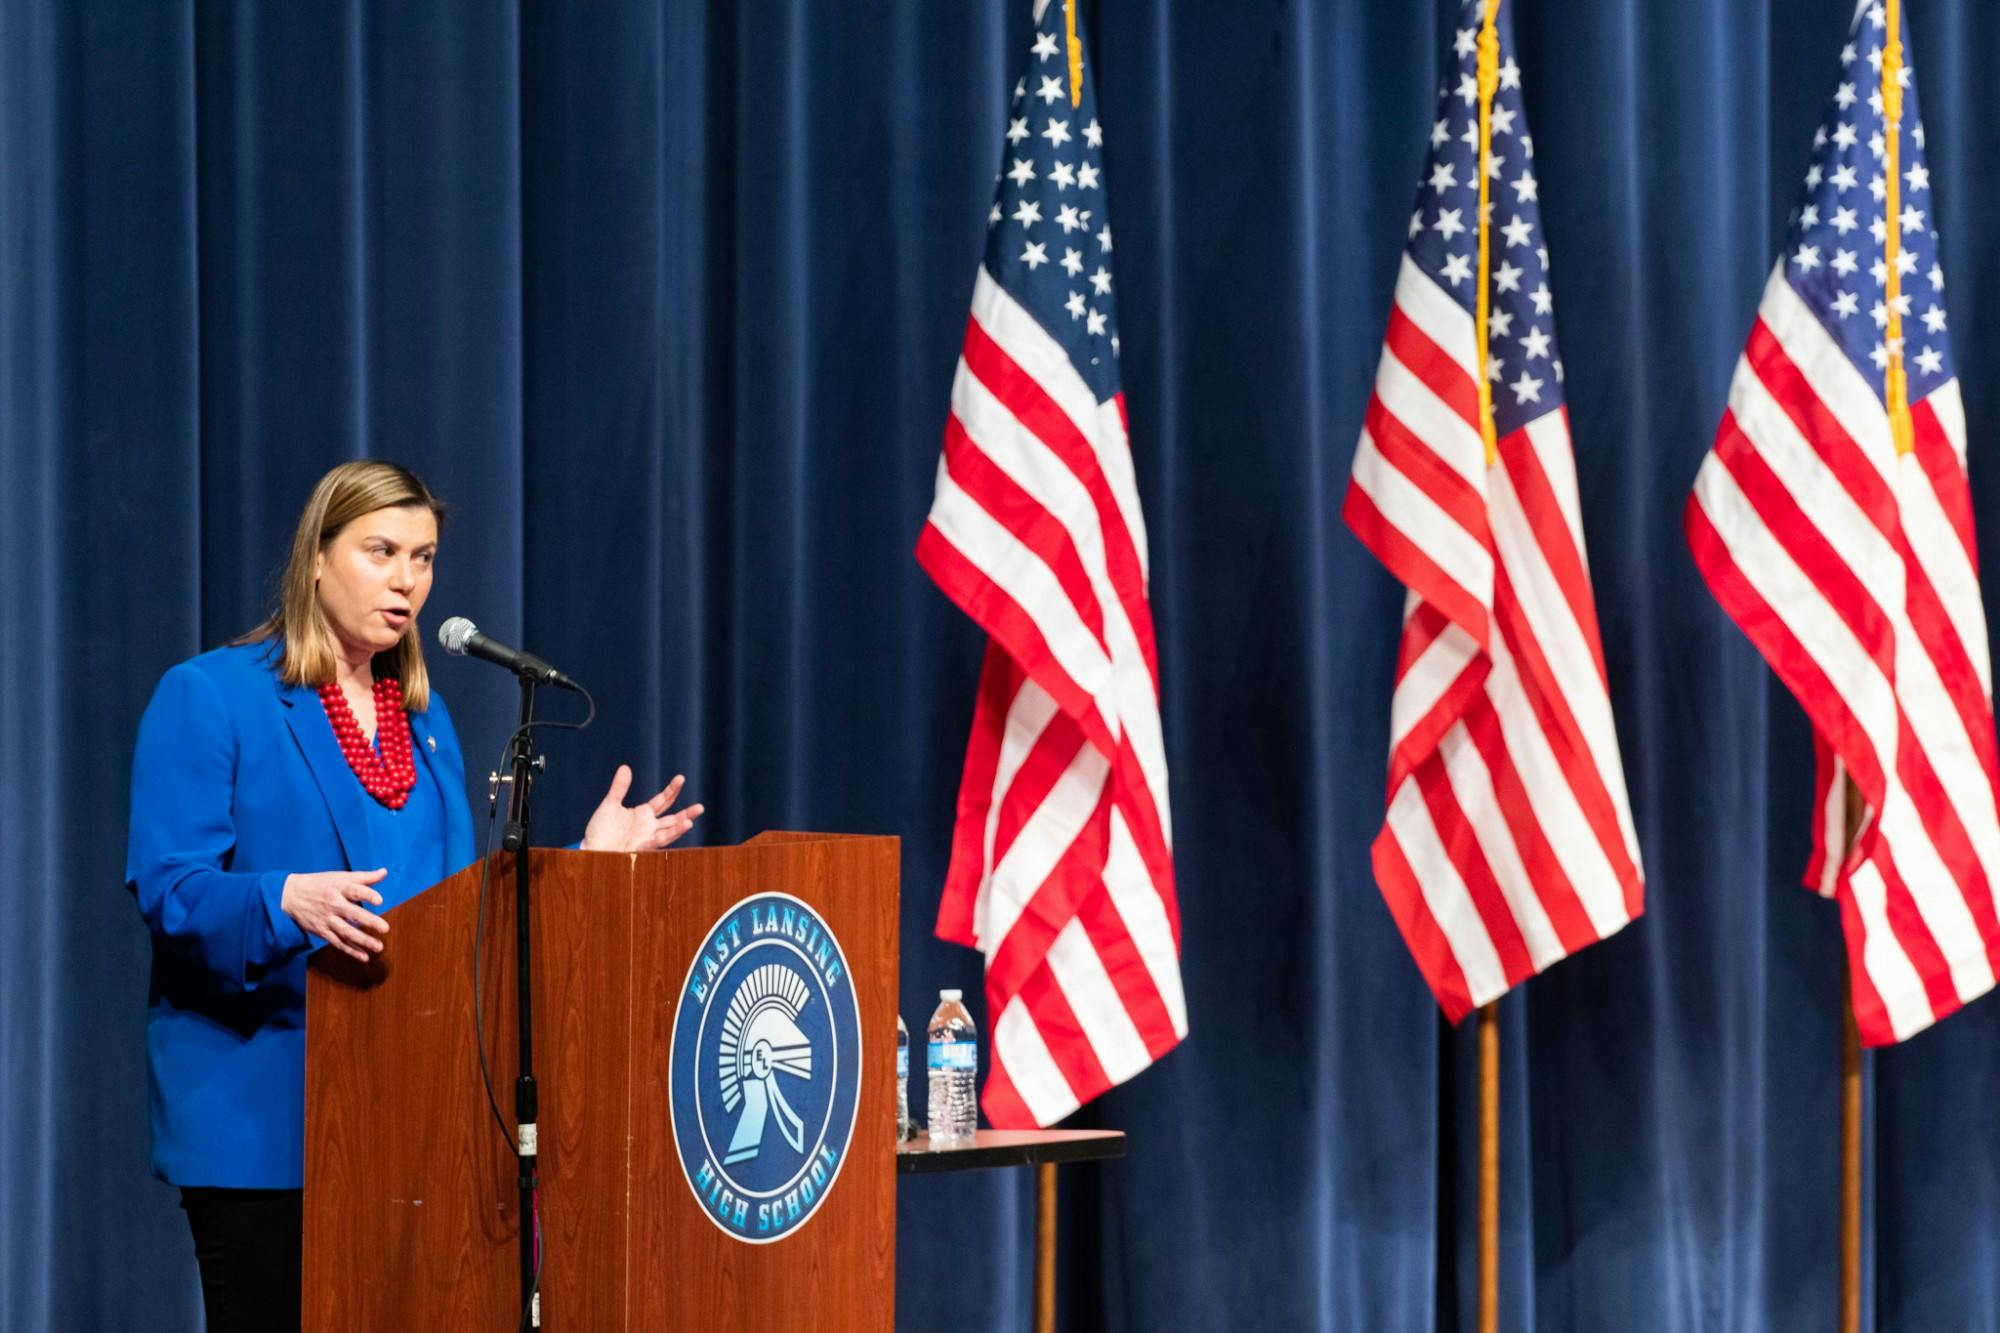 <p>East Lansing High School holds State of the District Town Hall with U.S. Rep. Elissa Slotkin and State Rep. Julie Brixie on Feb. 21, 2020. </p>